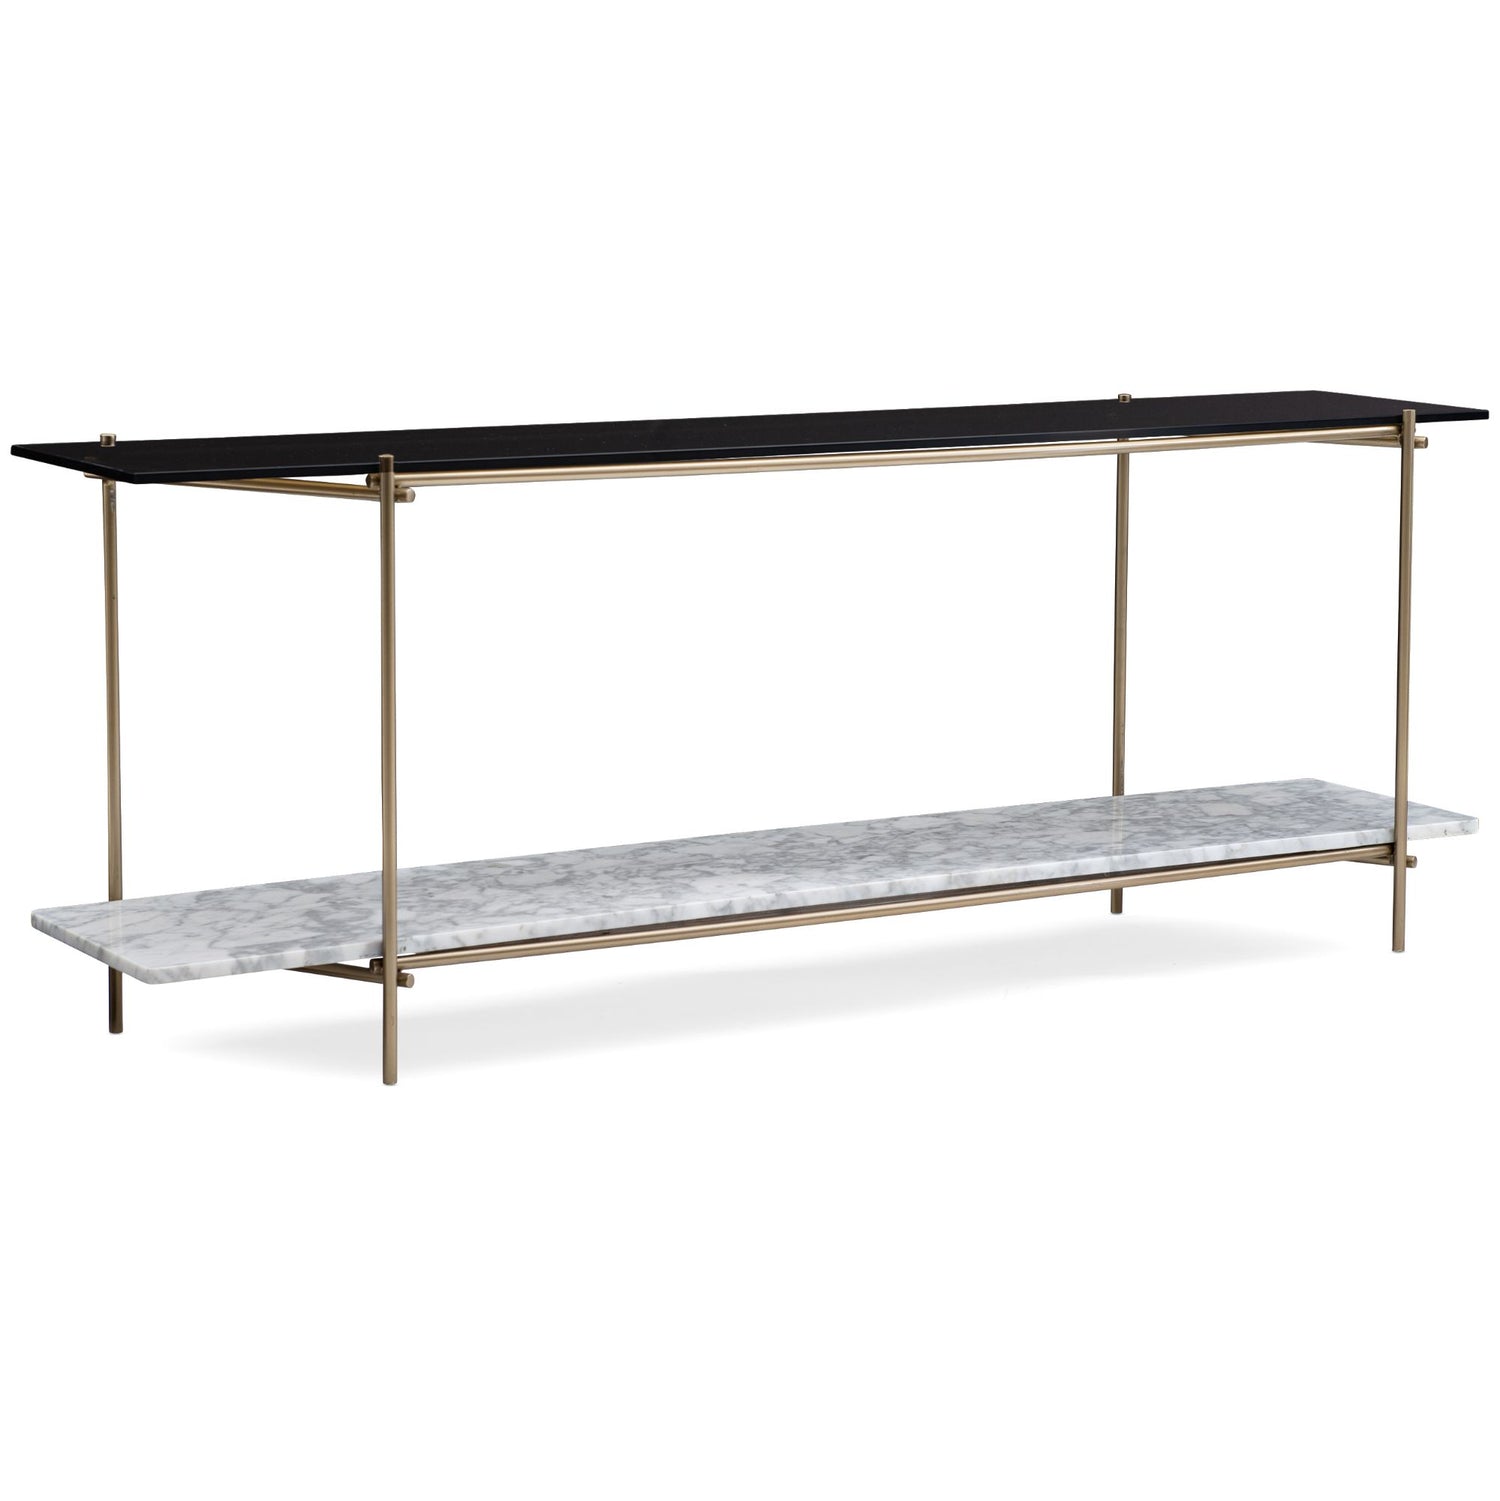  Caracole-Caracole Modern Edge Concentric Console Table-Black 445 